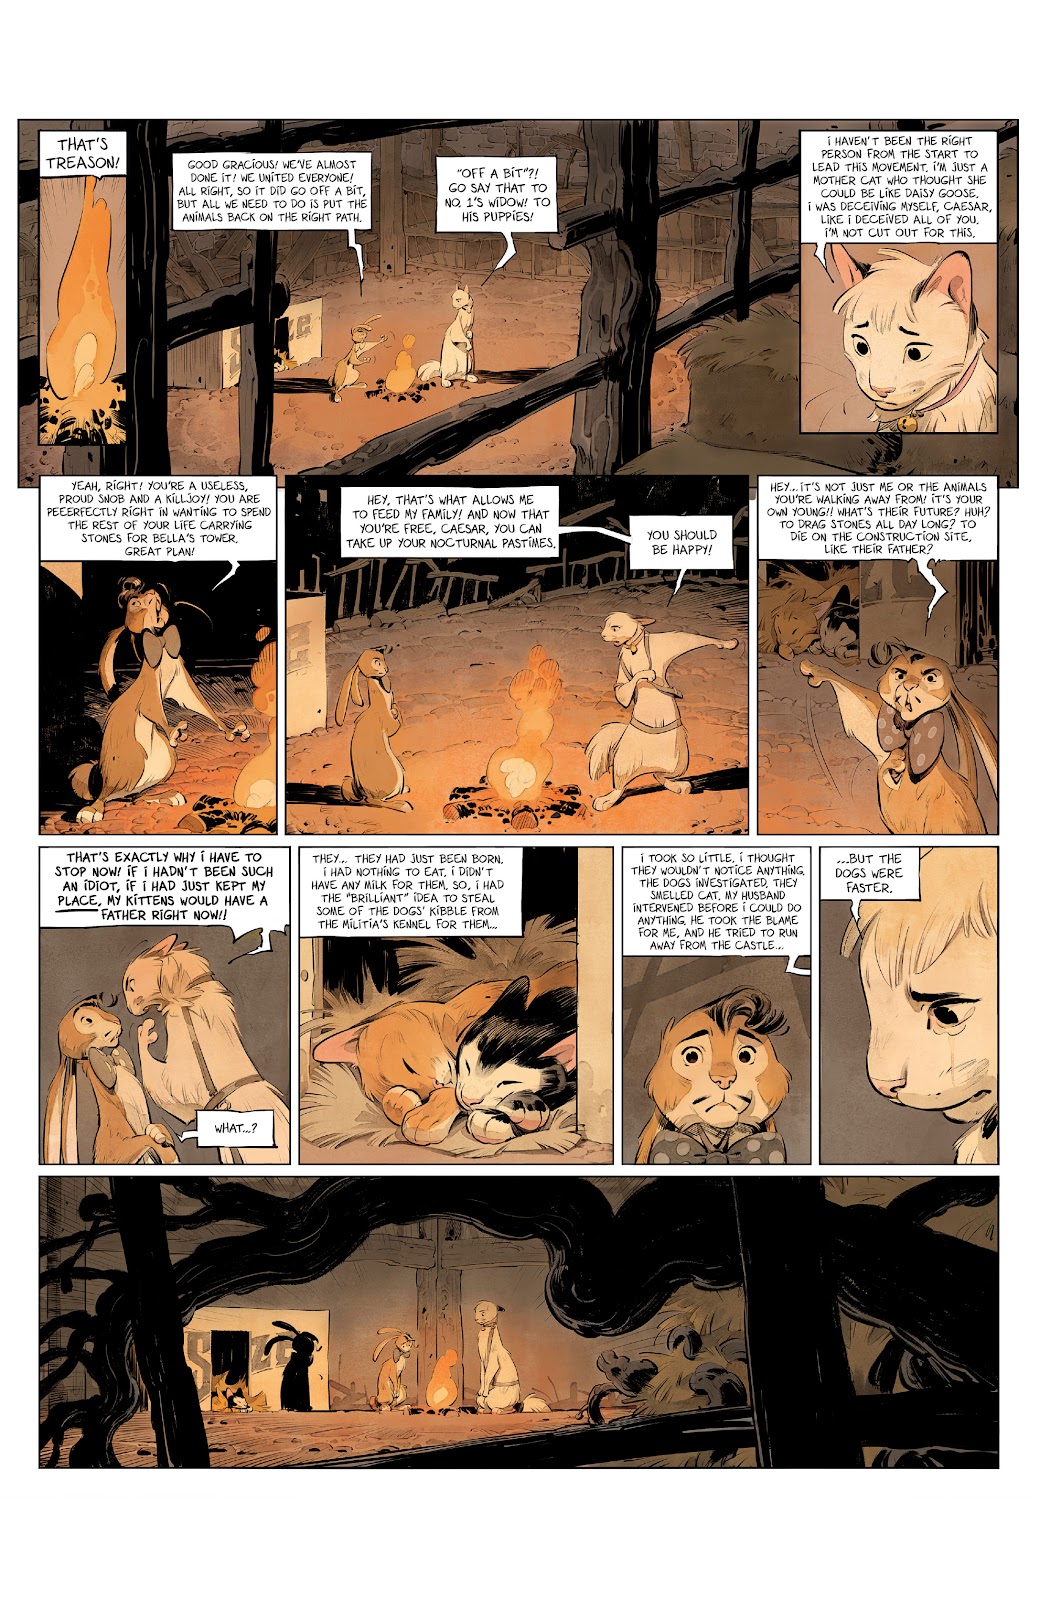 Animal Castle Vol. 2 issue 1 - Page 12